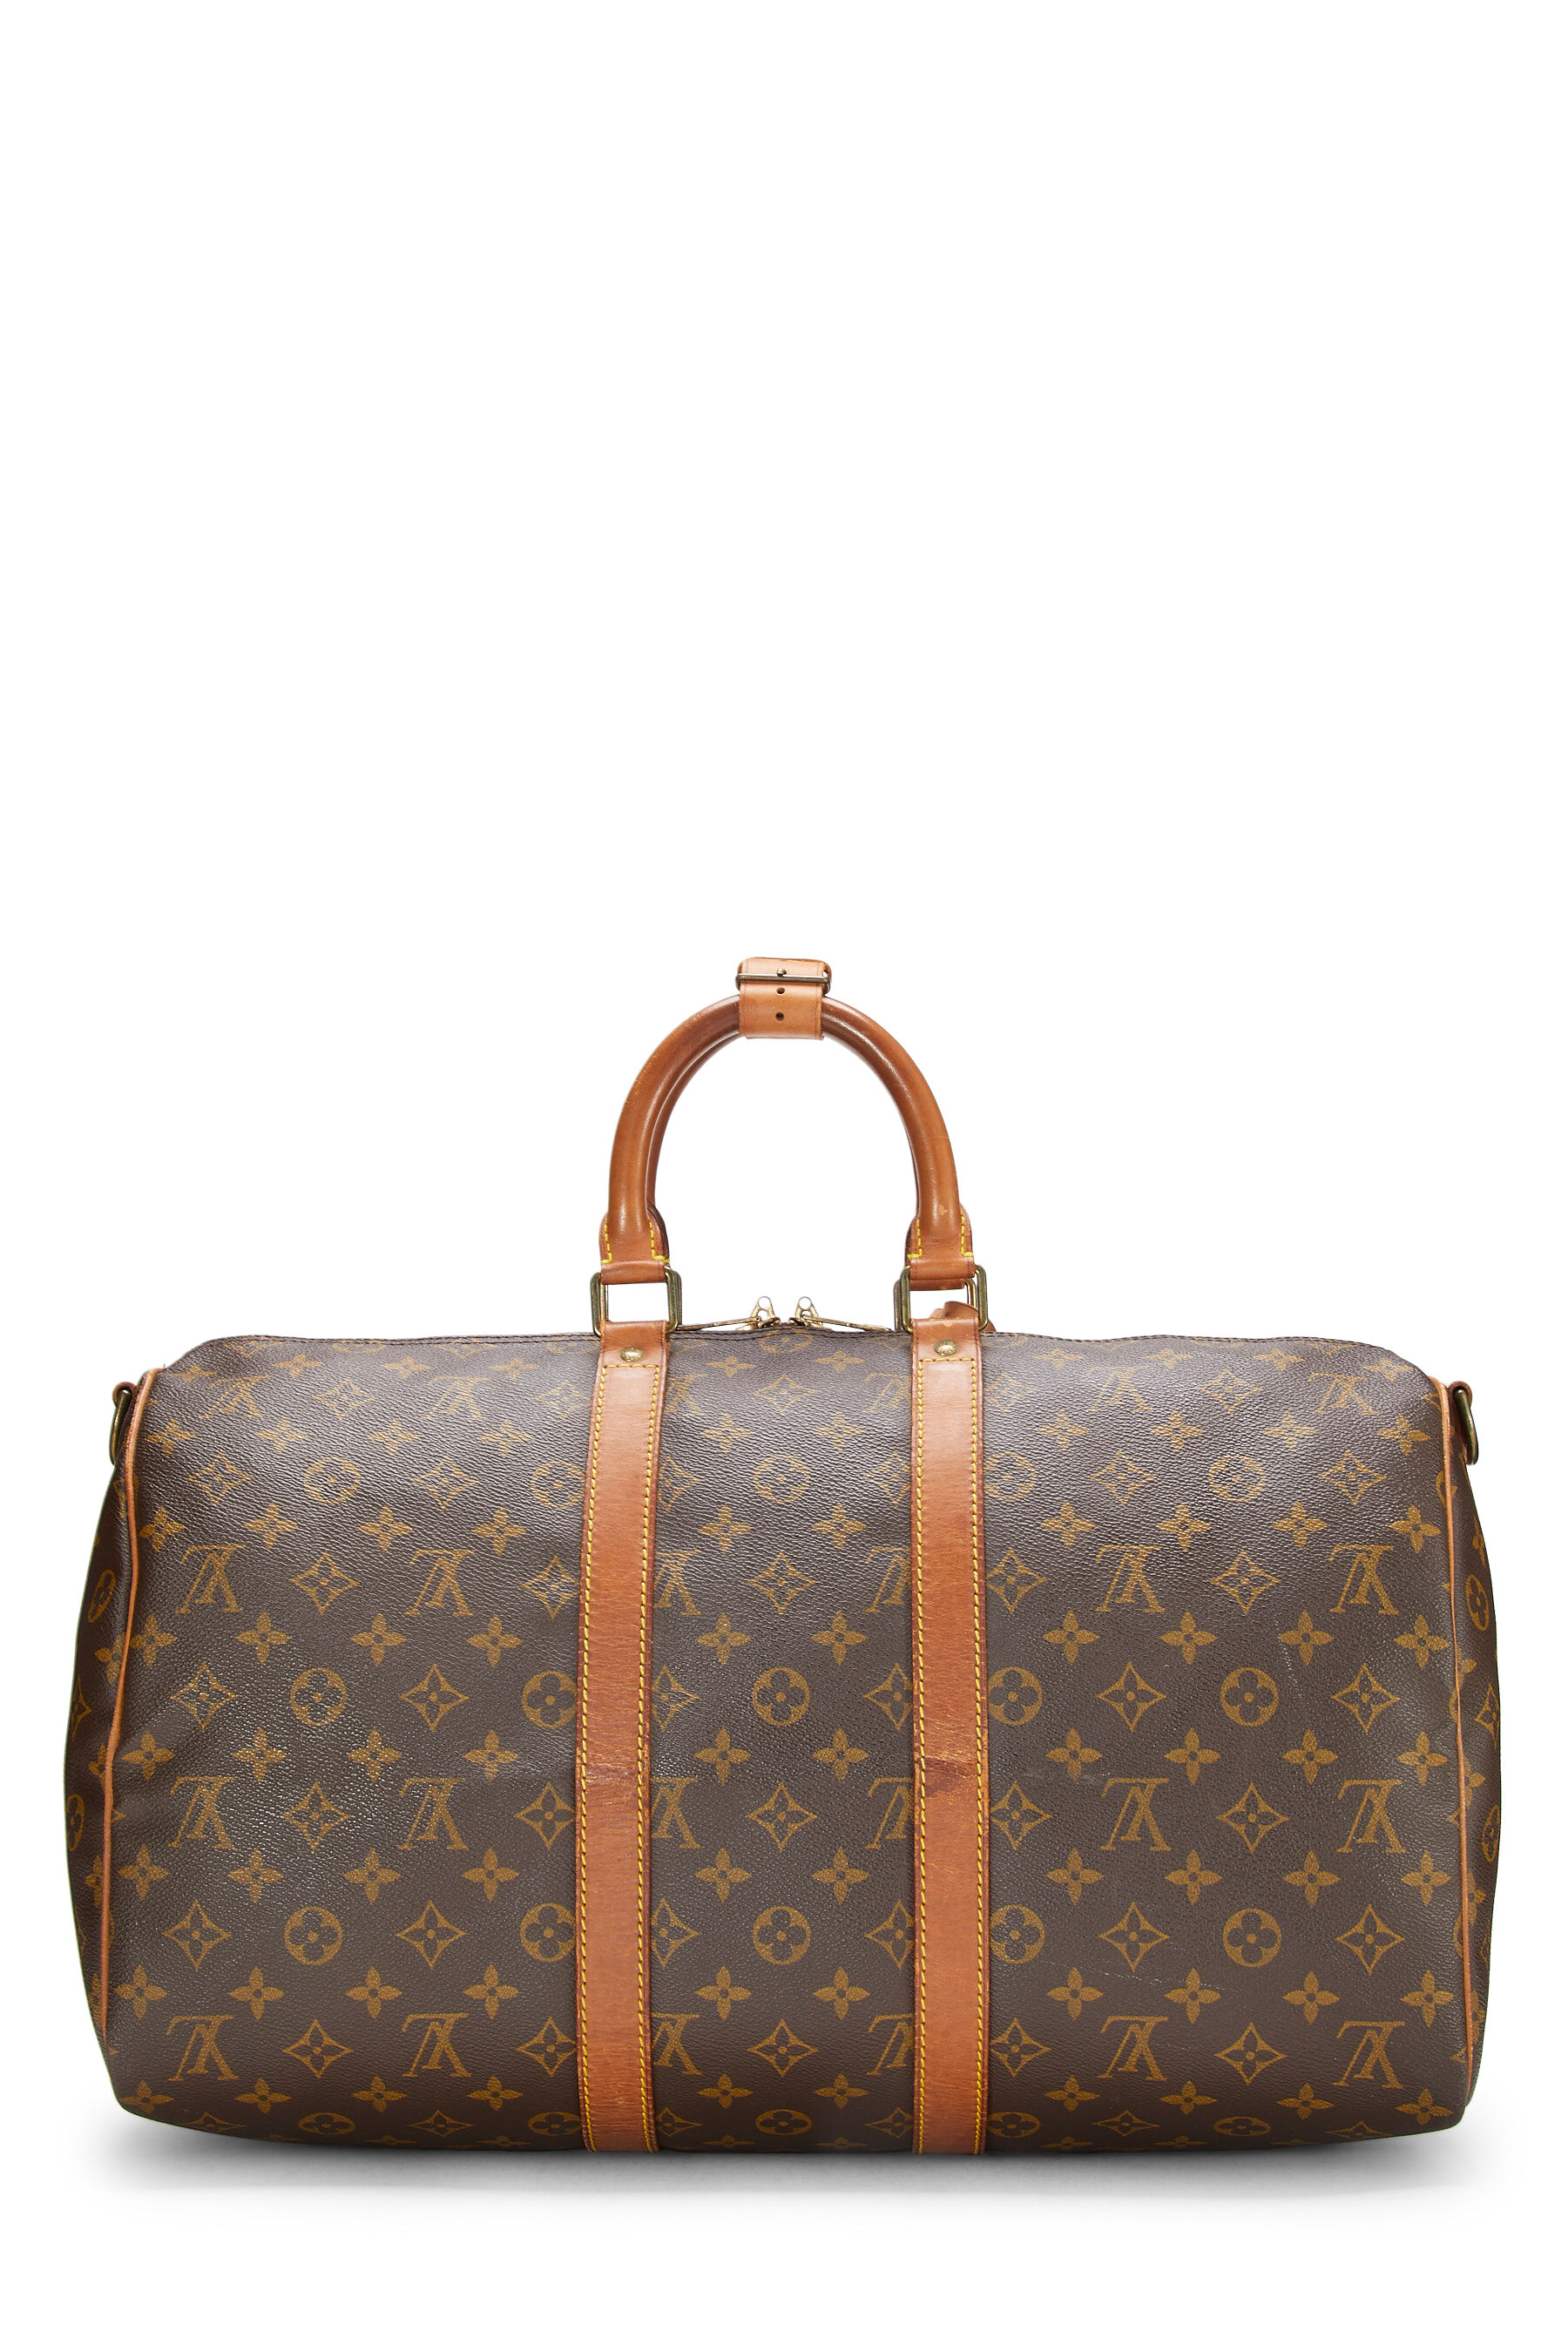 Louis Vuitton Keepall Bandouliere 45 for Sale in Las Vegas, NV